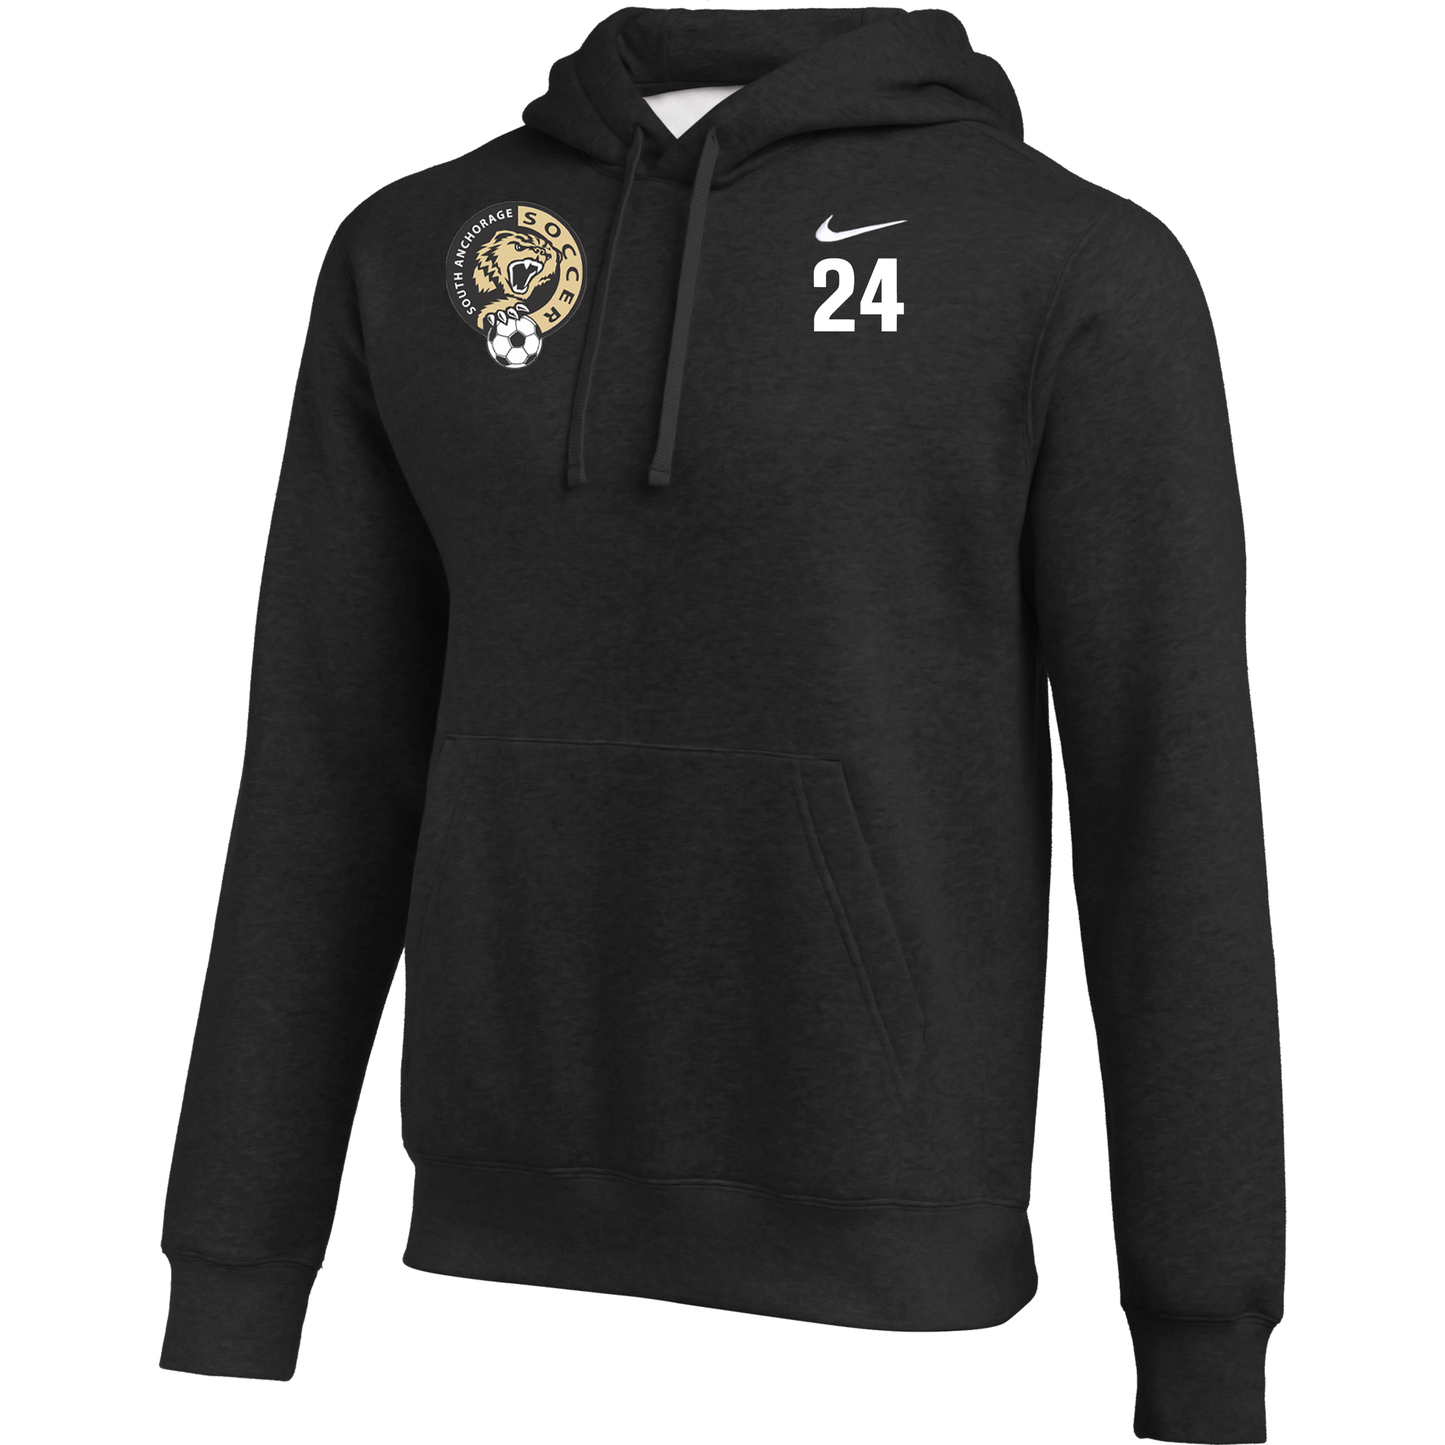 South Anchorage HS Hoodie [Men's]